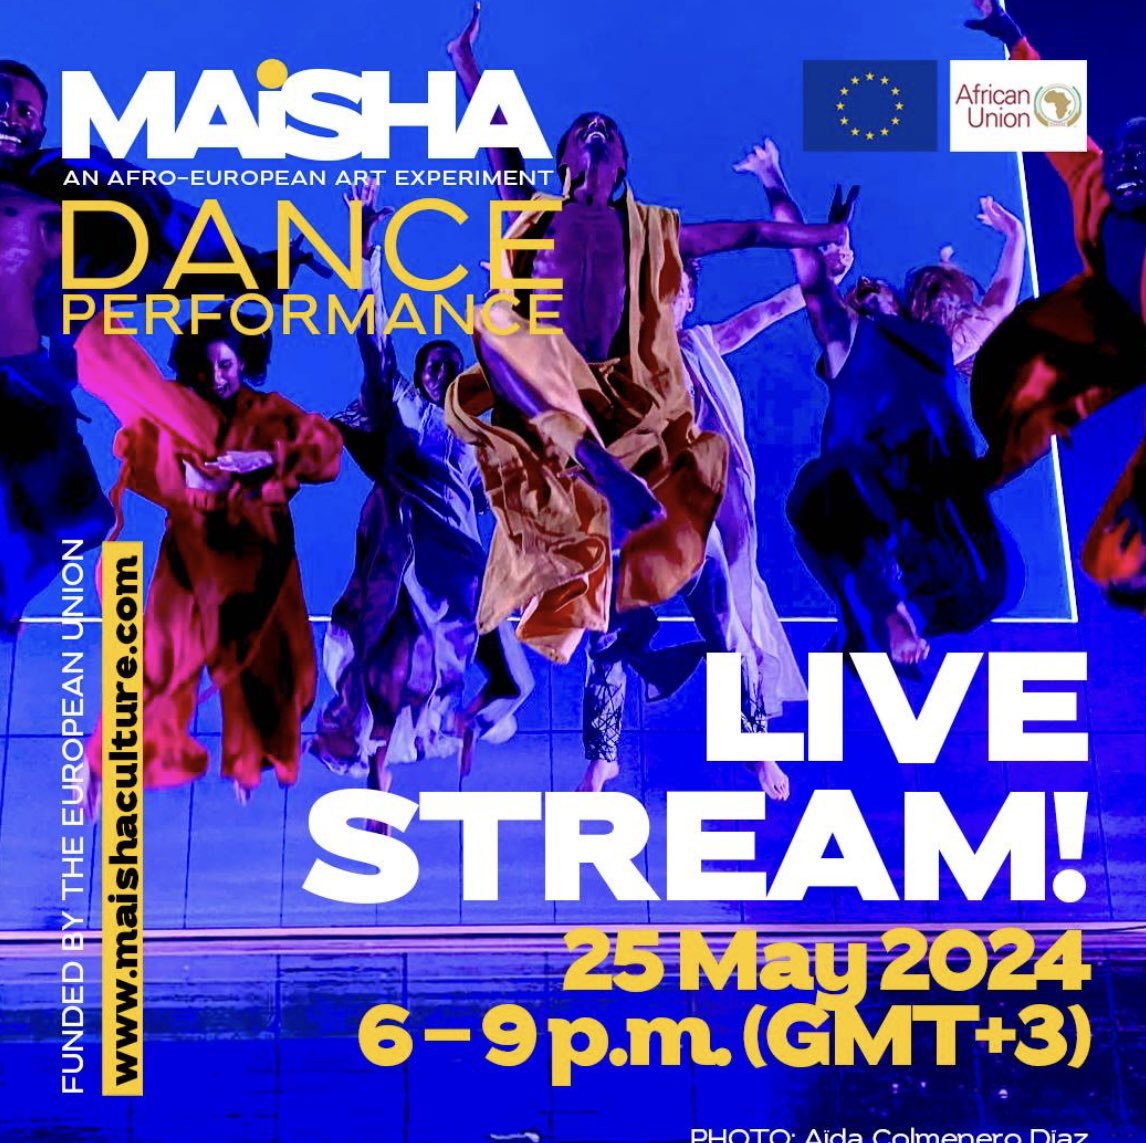 Happy #AfricaDay The European Union Delegation to the African Union celebrates with the MAISHA DANCE. A testimony to the power of art to unite and a great example of Africa-Europe cooperation and intercultural dialogue. Watch 👉facebook.com/events/1185547… @EUtoAU